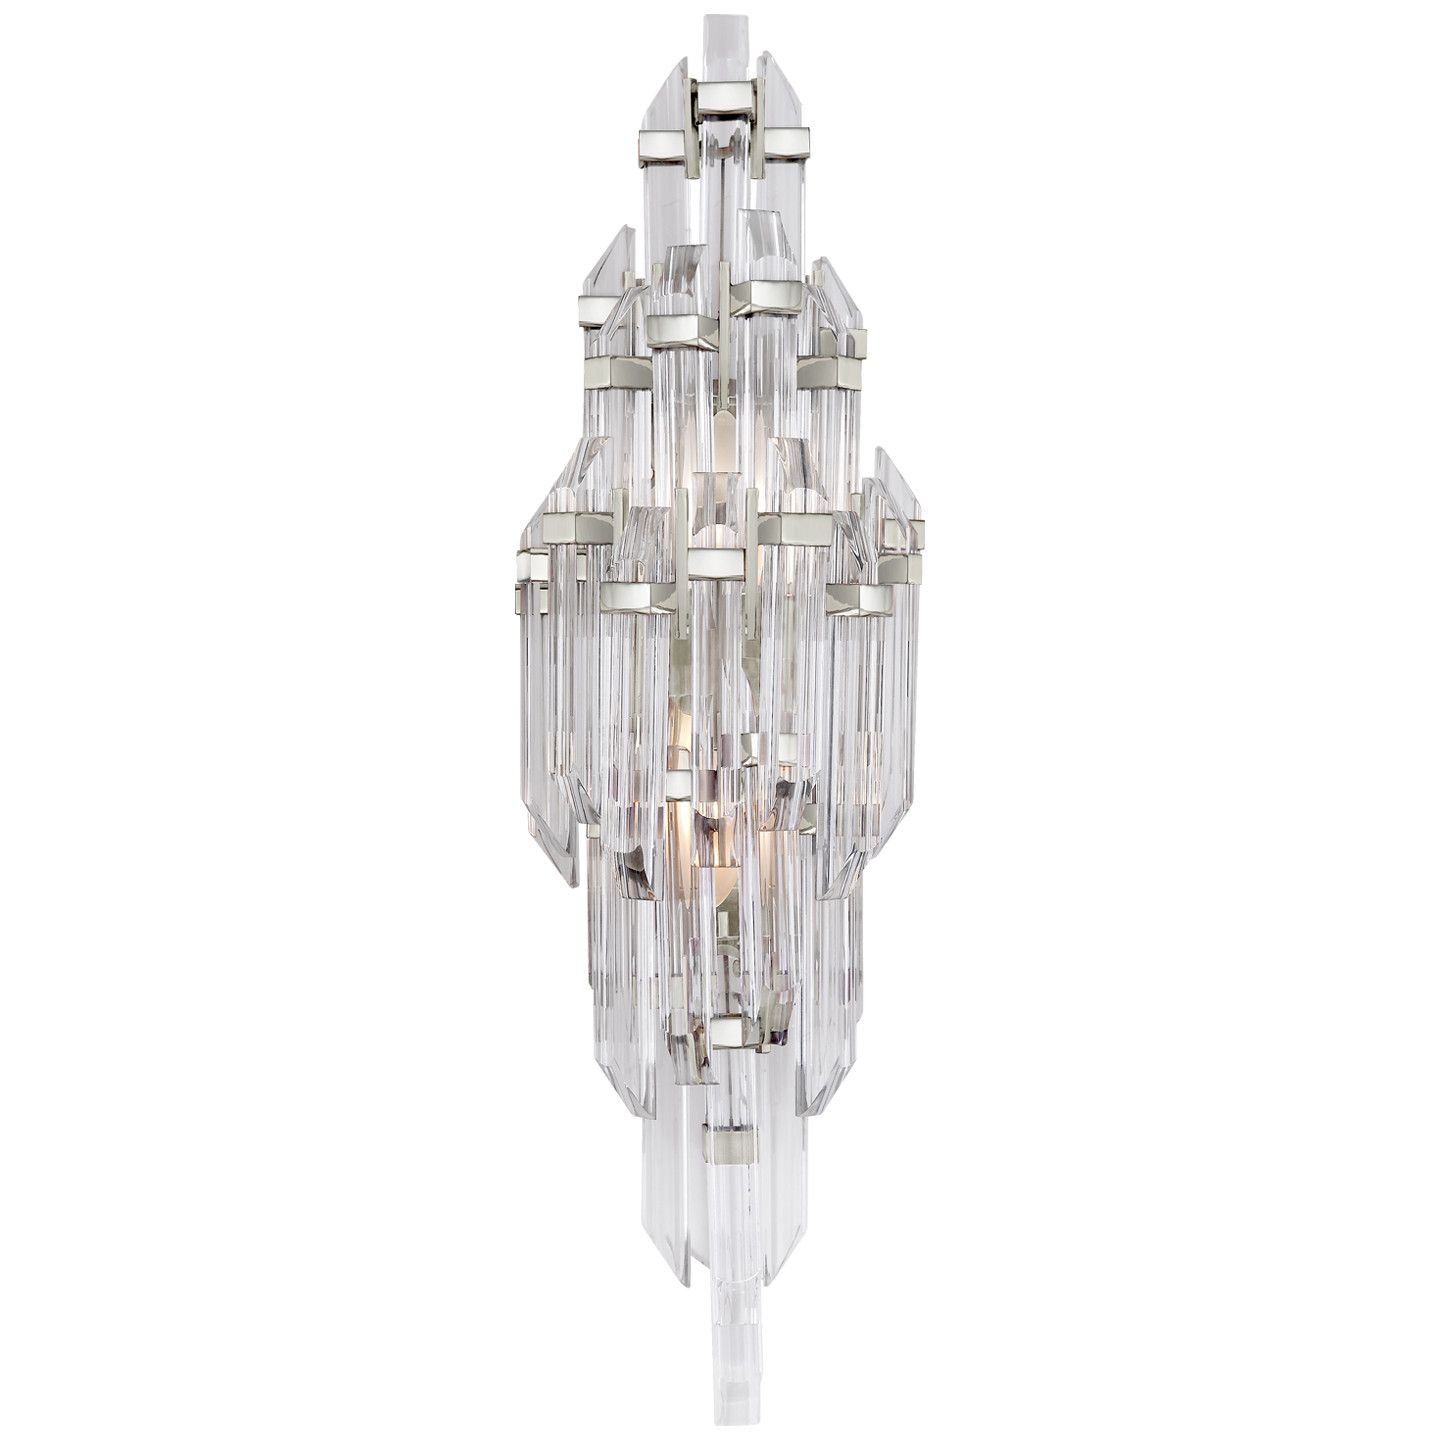 Adele Small Sconce Polished Nickel